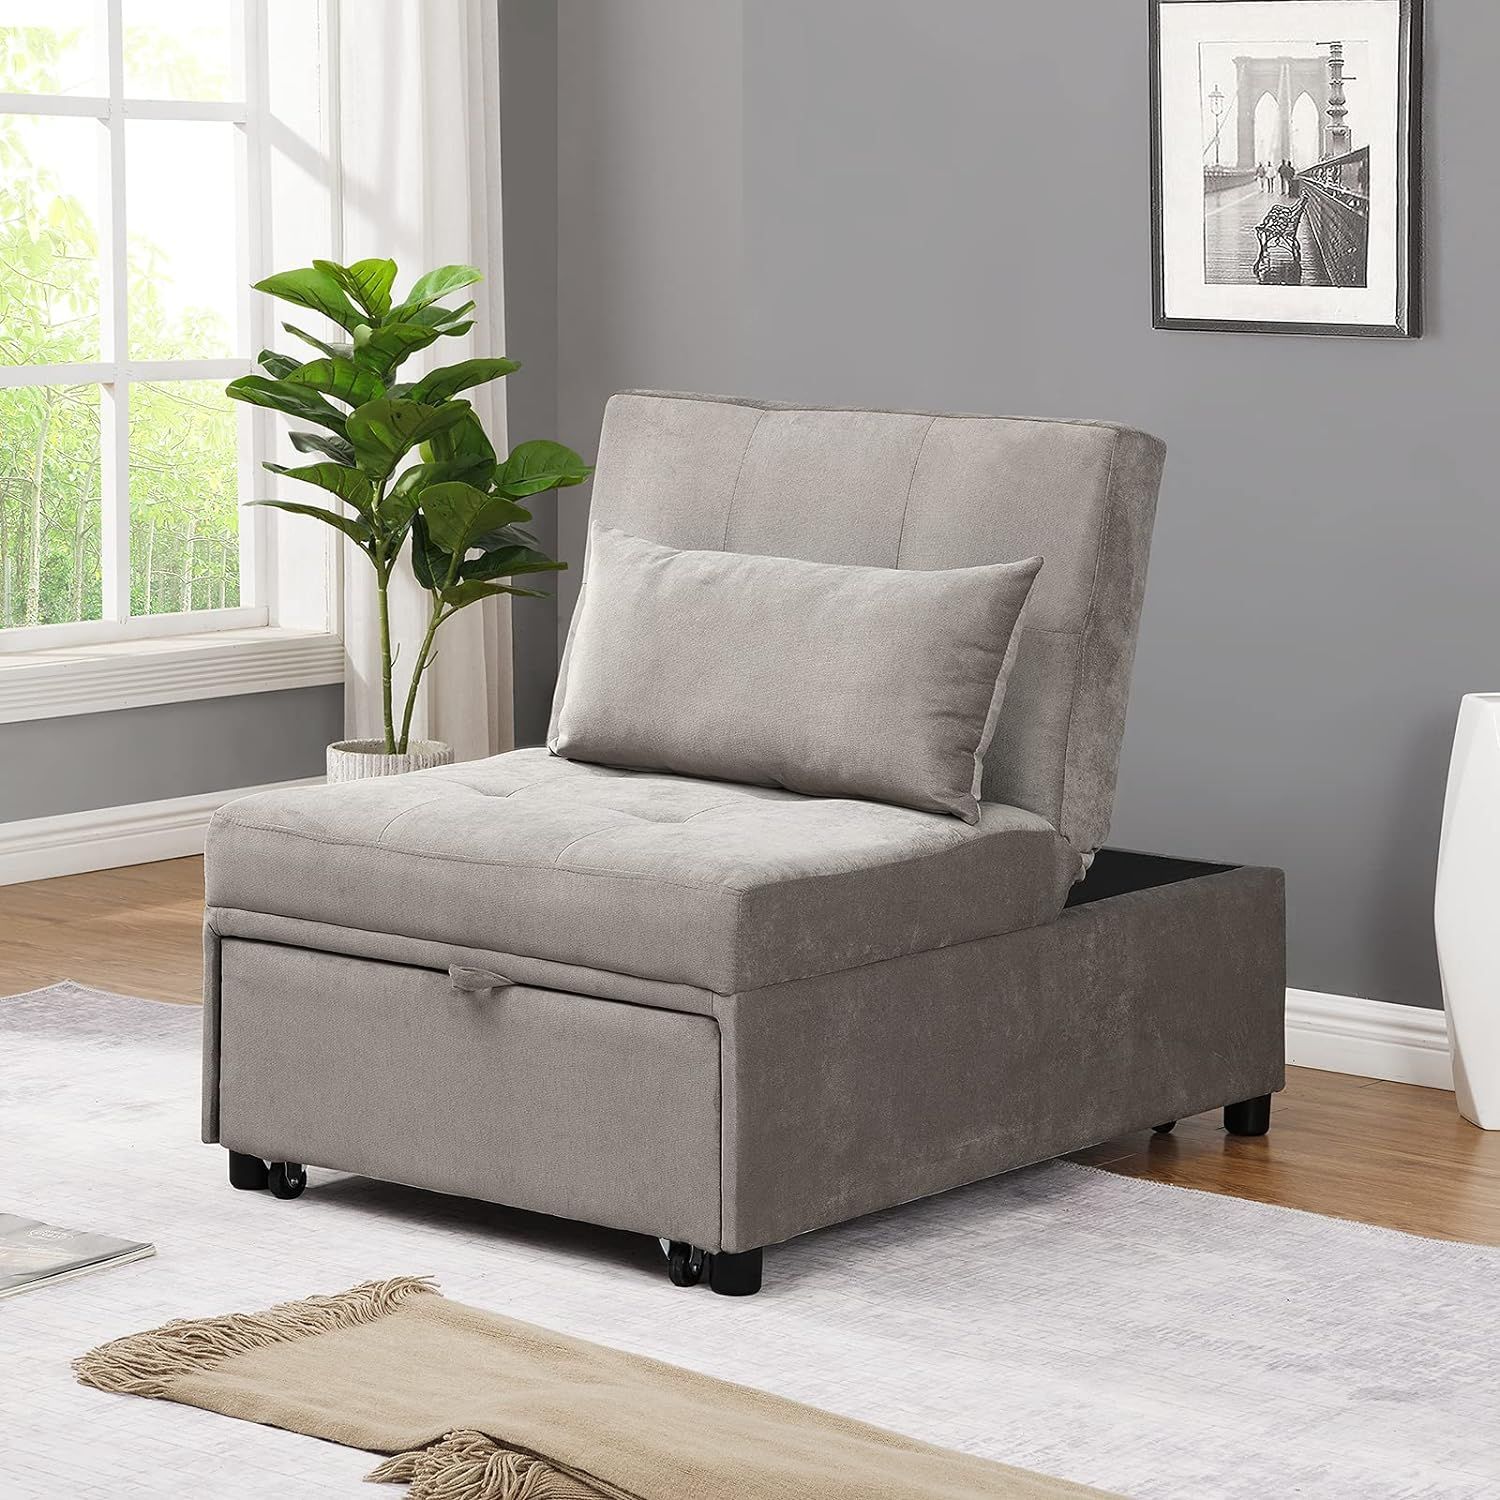 N B Sofa Bed, Convertible Chair 4 In 1 India | Ubuy With Regard To 4 In 1 Convertible Sleeper Chair Beds (Photo 11 of 15)